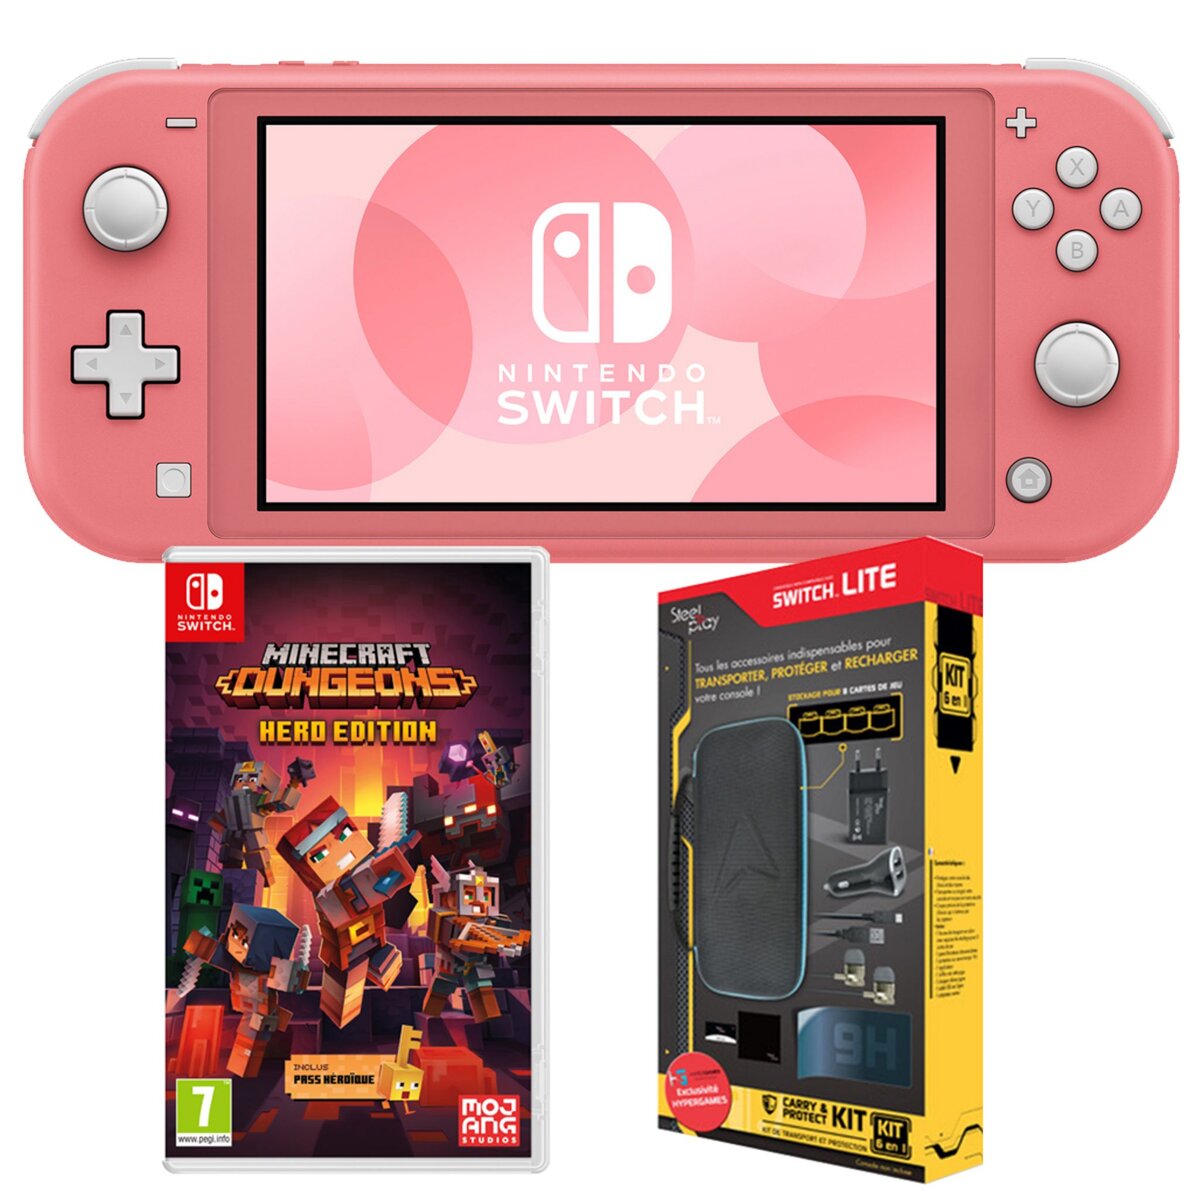 NINTENDO EXCLU WEB Console Nintendo Switch Lite Corail + Minecraft Dungeons + Pack Exclu 6 Accessoires